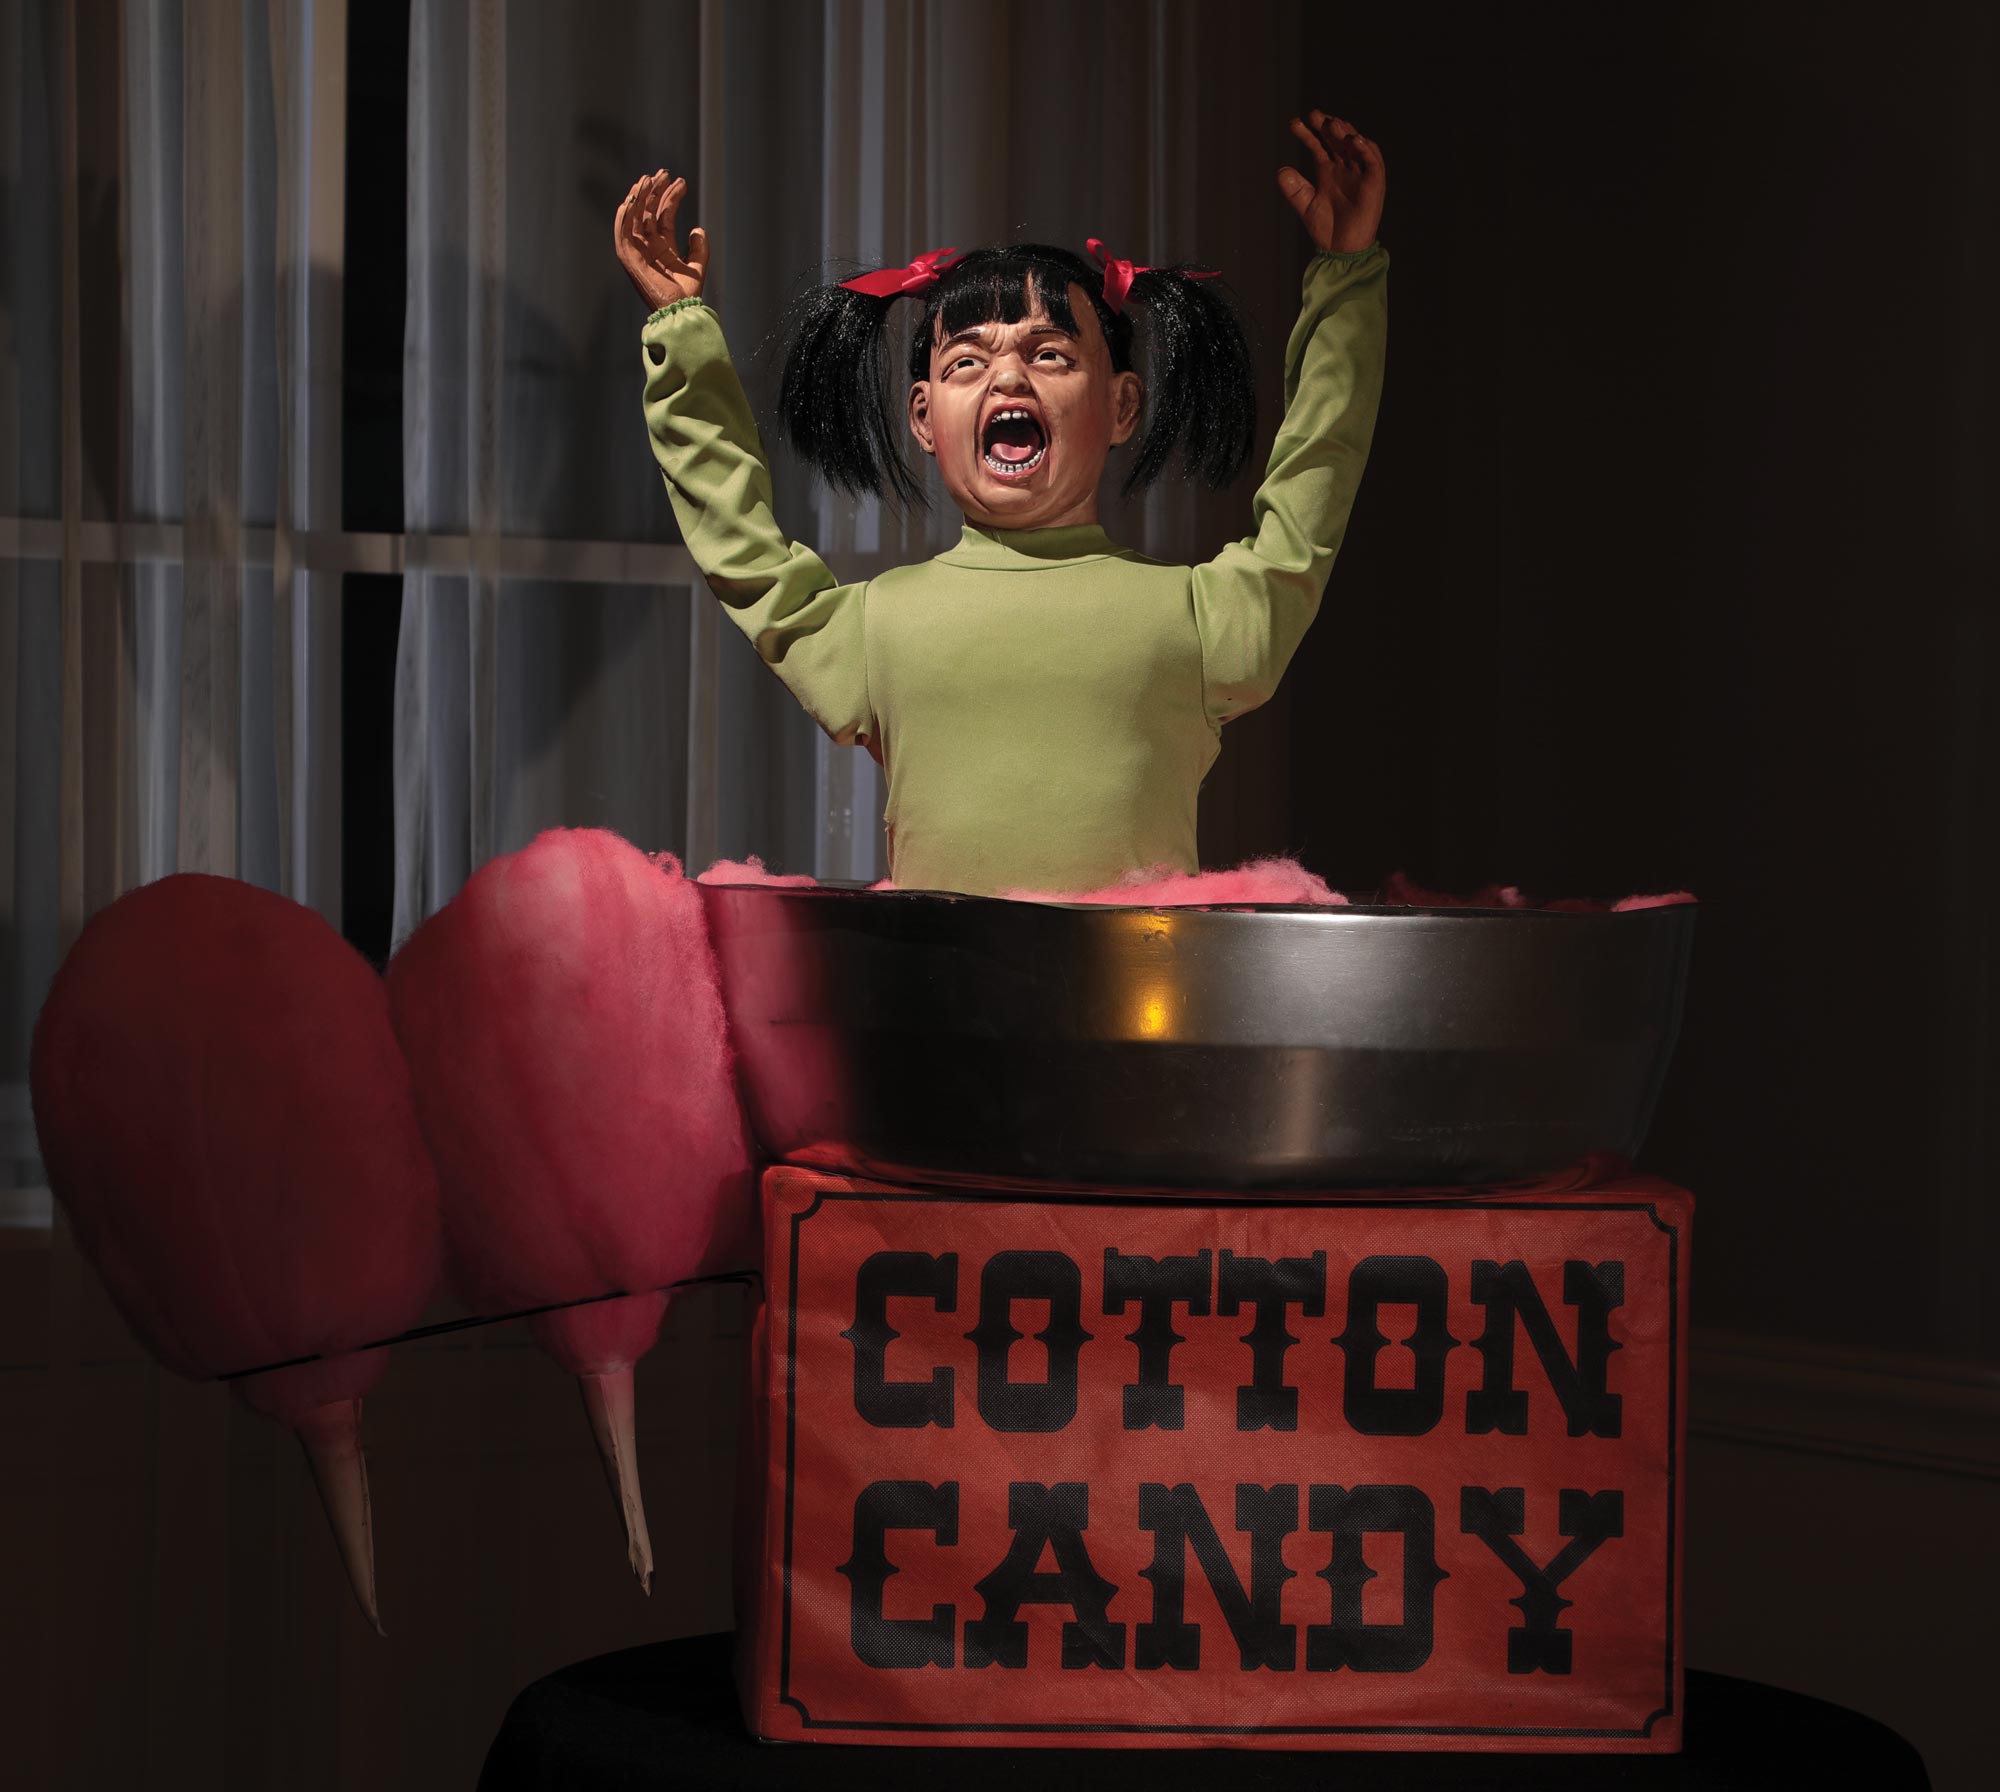 36 Cotton Candice Animated Prop